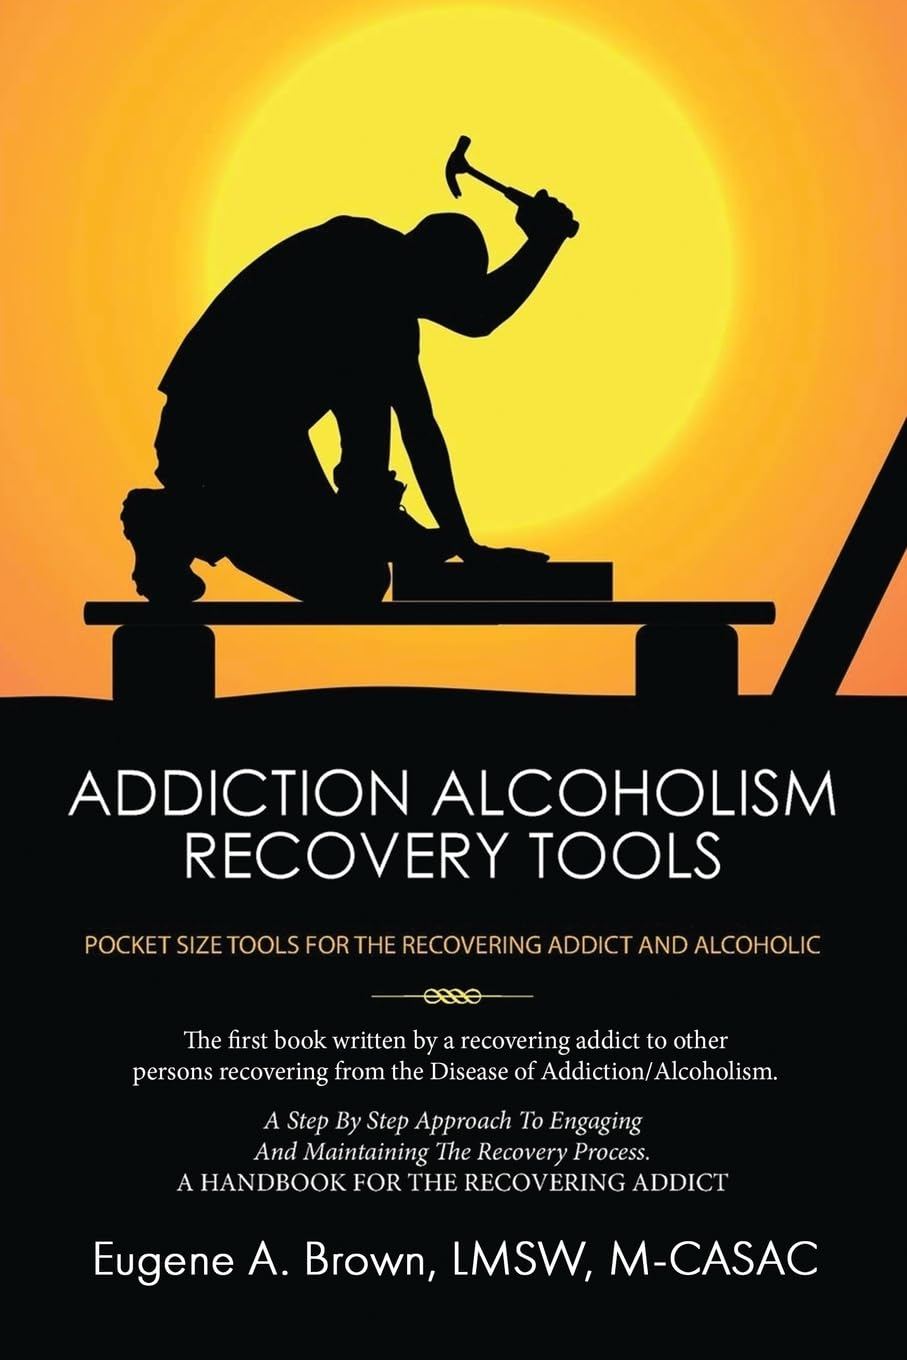 Author's Tranquility Presents - "Addiction Alcoholism Recovery Tools" by Eugene Brown - A Compassionate Guide to Empower Recovery and Rebuild Lives